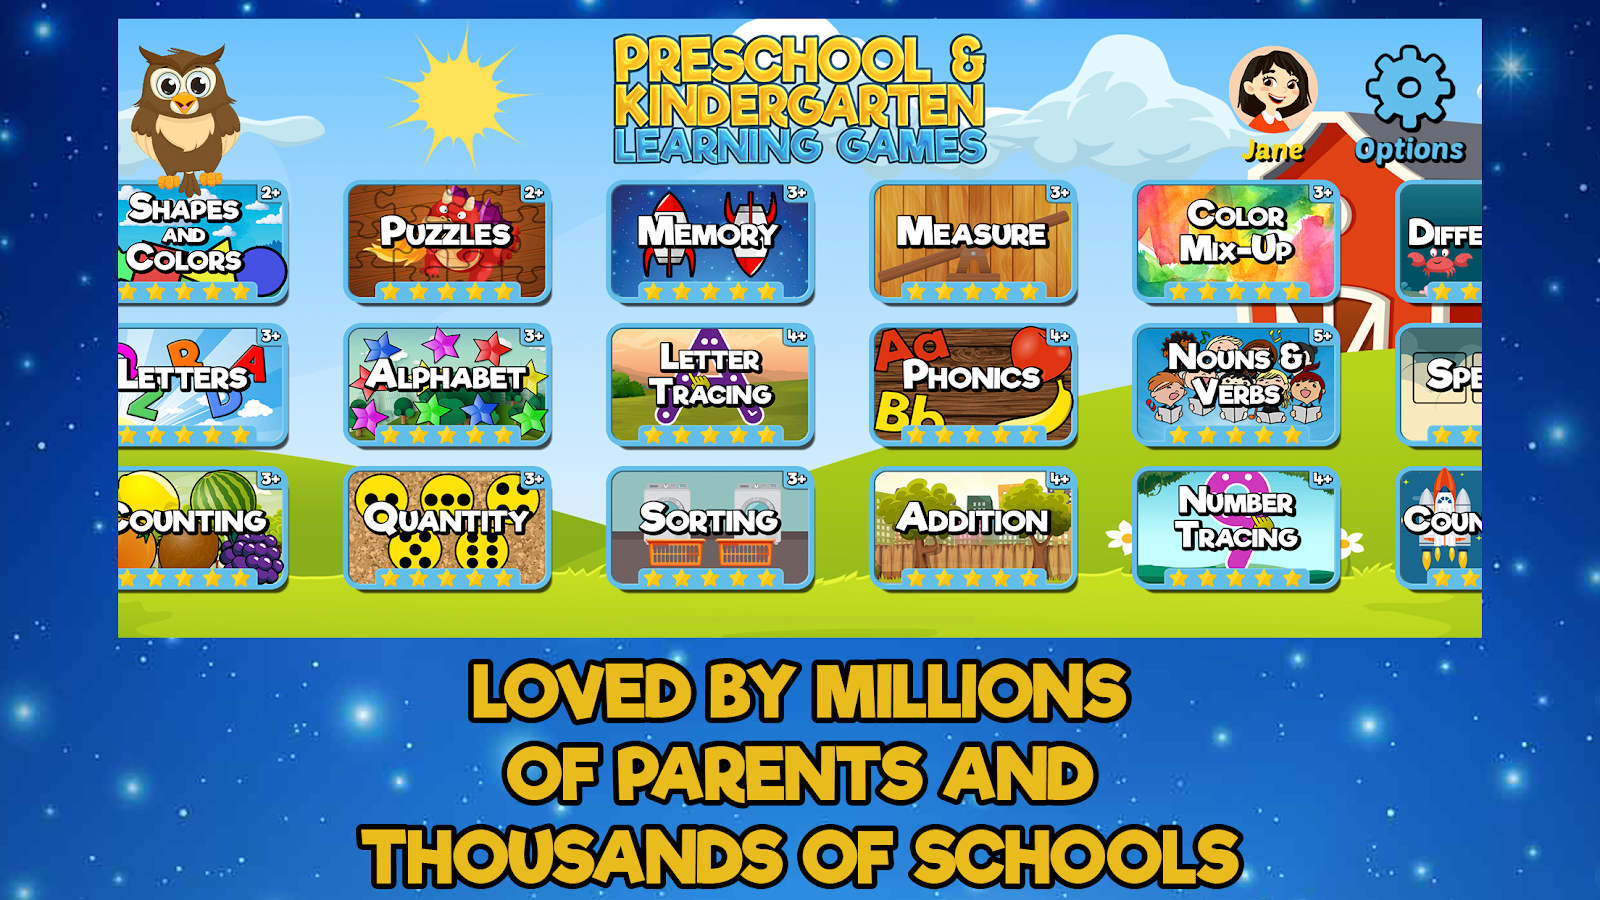 Kids Preschool Learning Games download the new